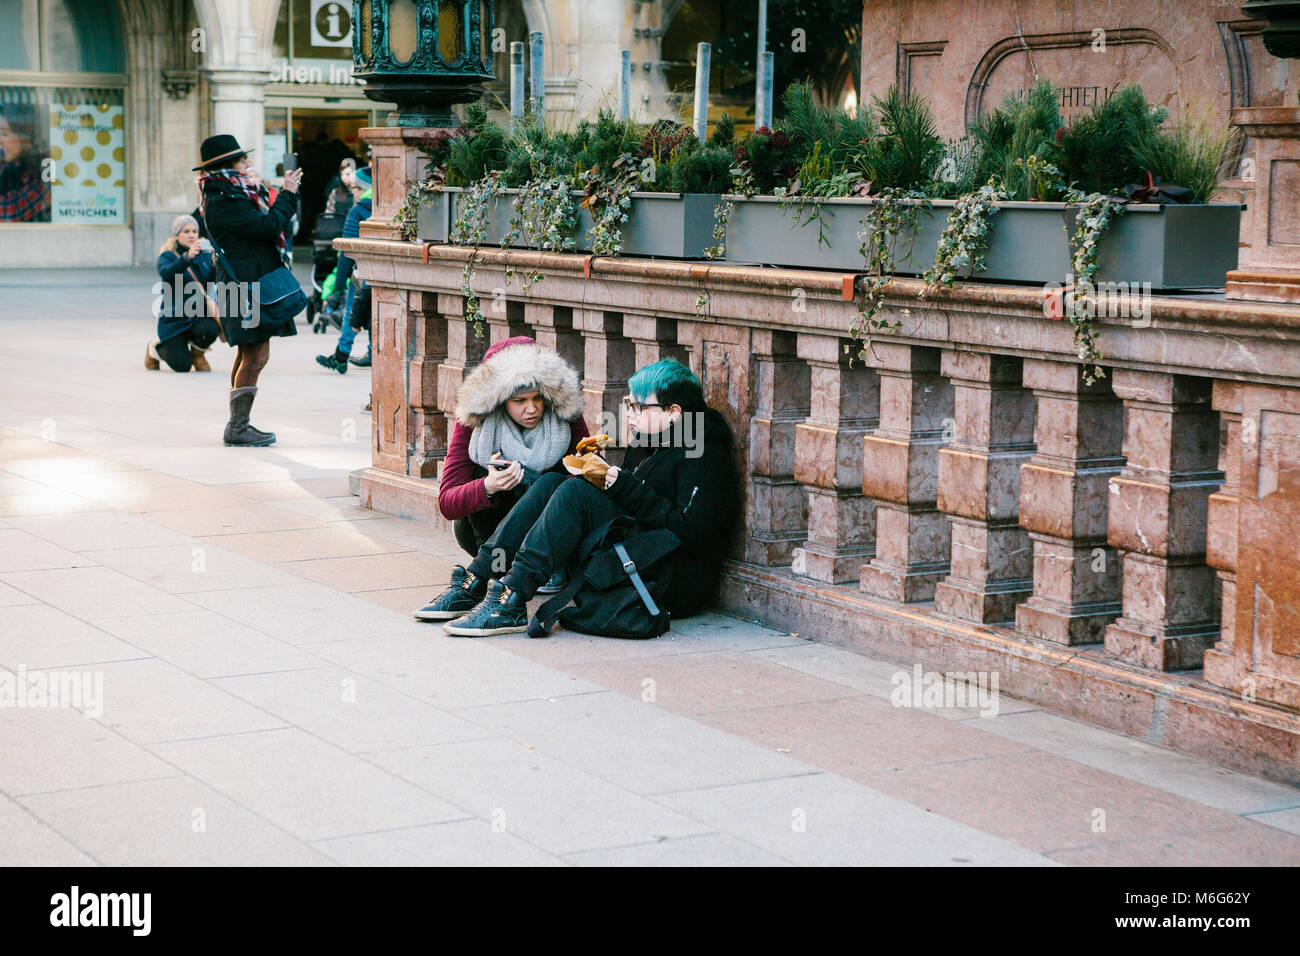 Munich, Germany, December 29, 2016: Two punk girls sit and eat in the central square in Munich. Subculture. Everyday routine life in Europe. Homeless, rebels. Stock Photo